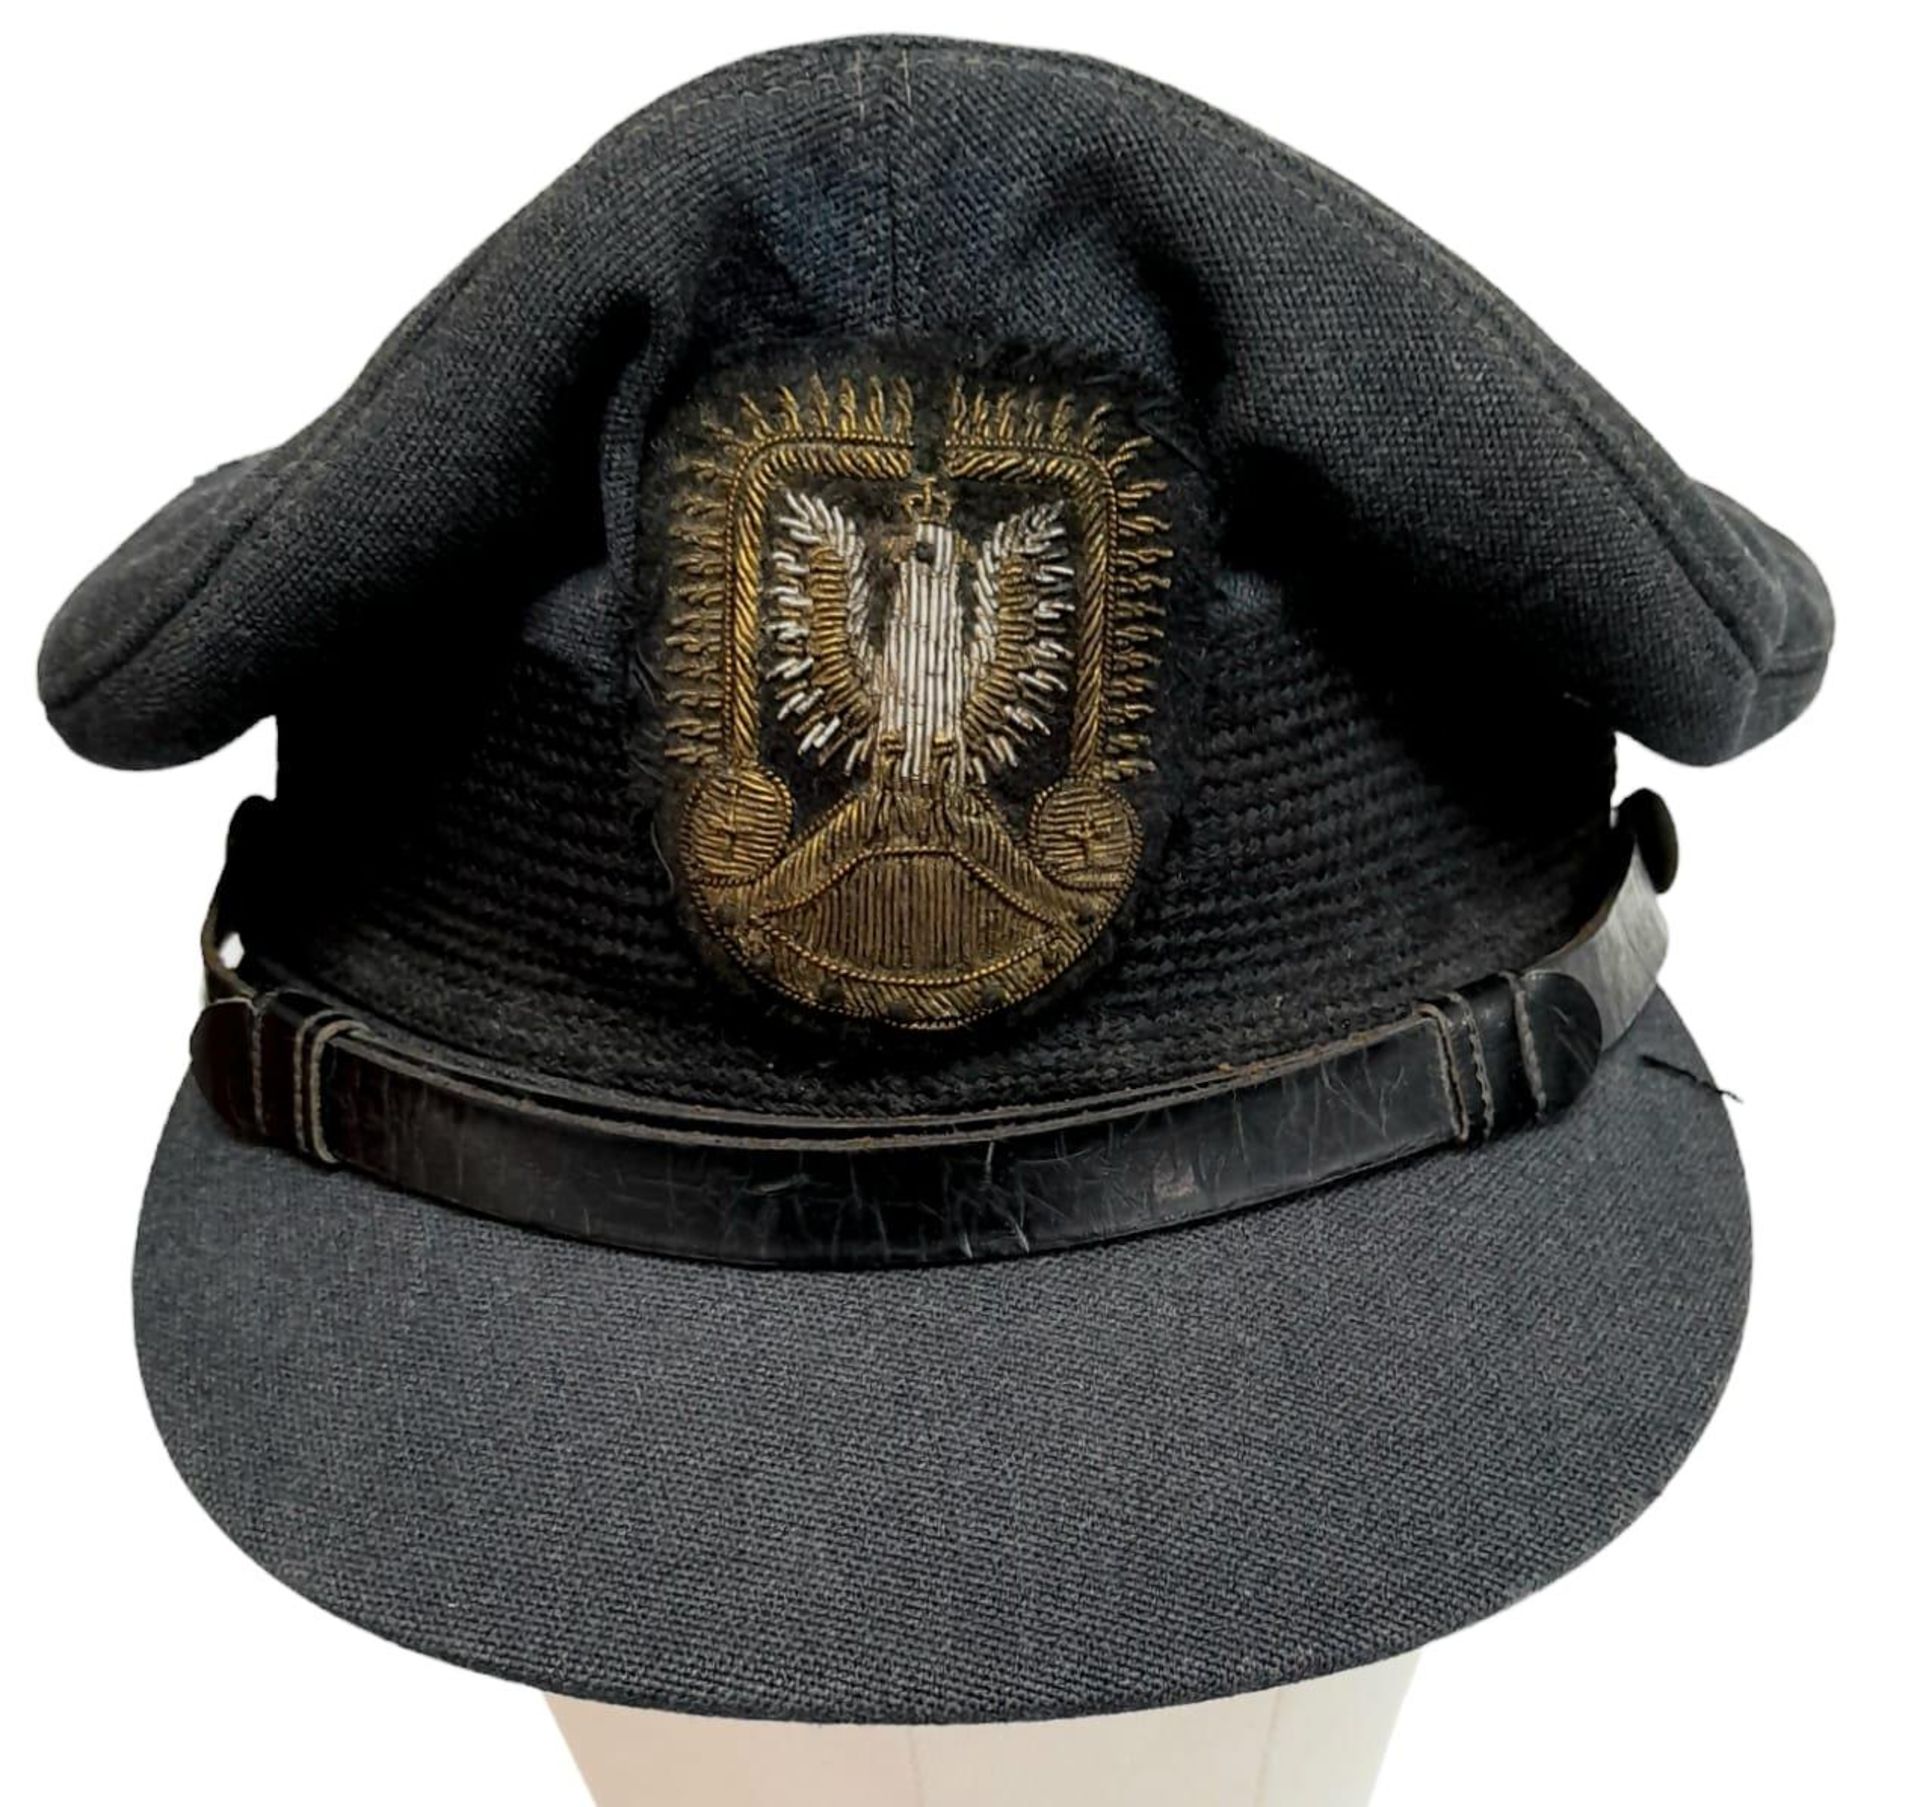 WW2 Canadian R.A.F Officers Cap with Polish Pilot Officers Cap Badge.